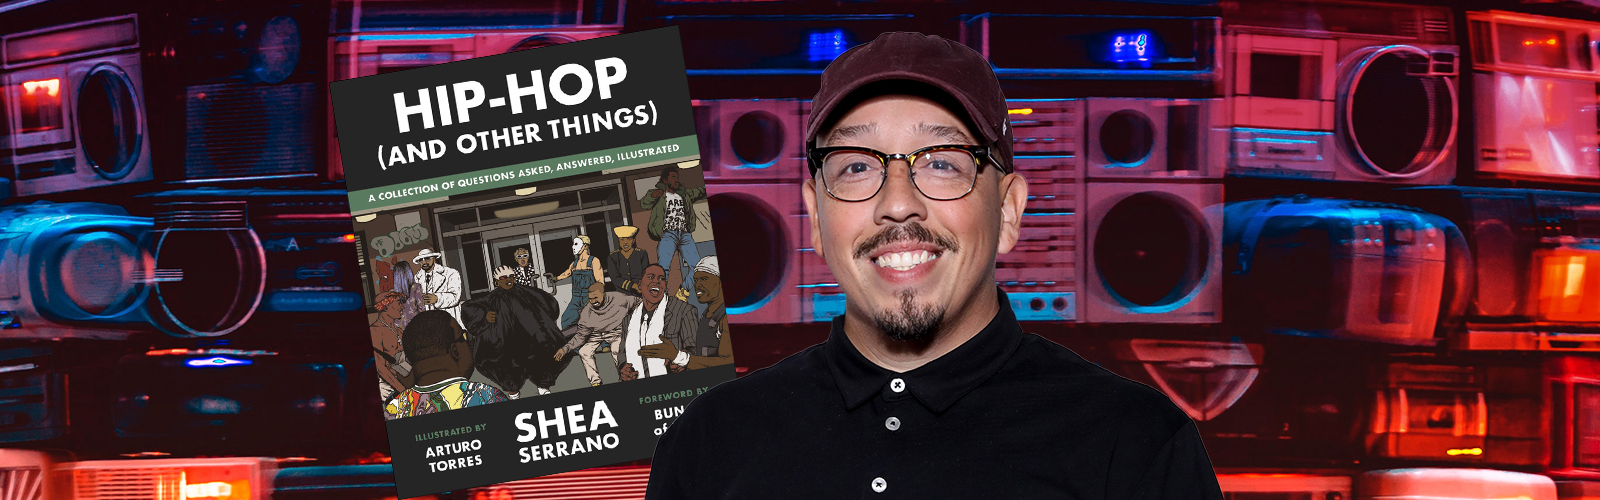 Shea Serrano Hip Hop And Other Things